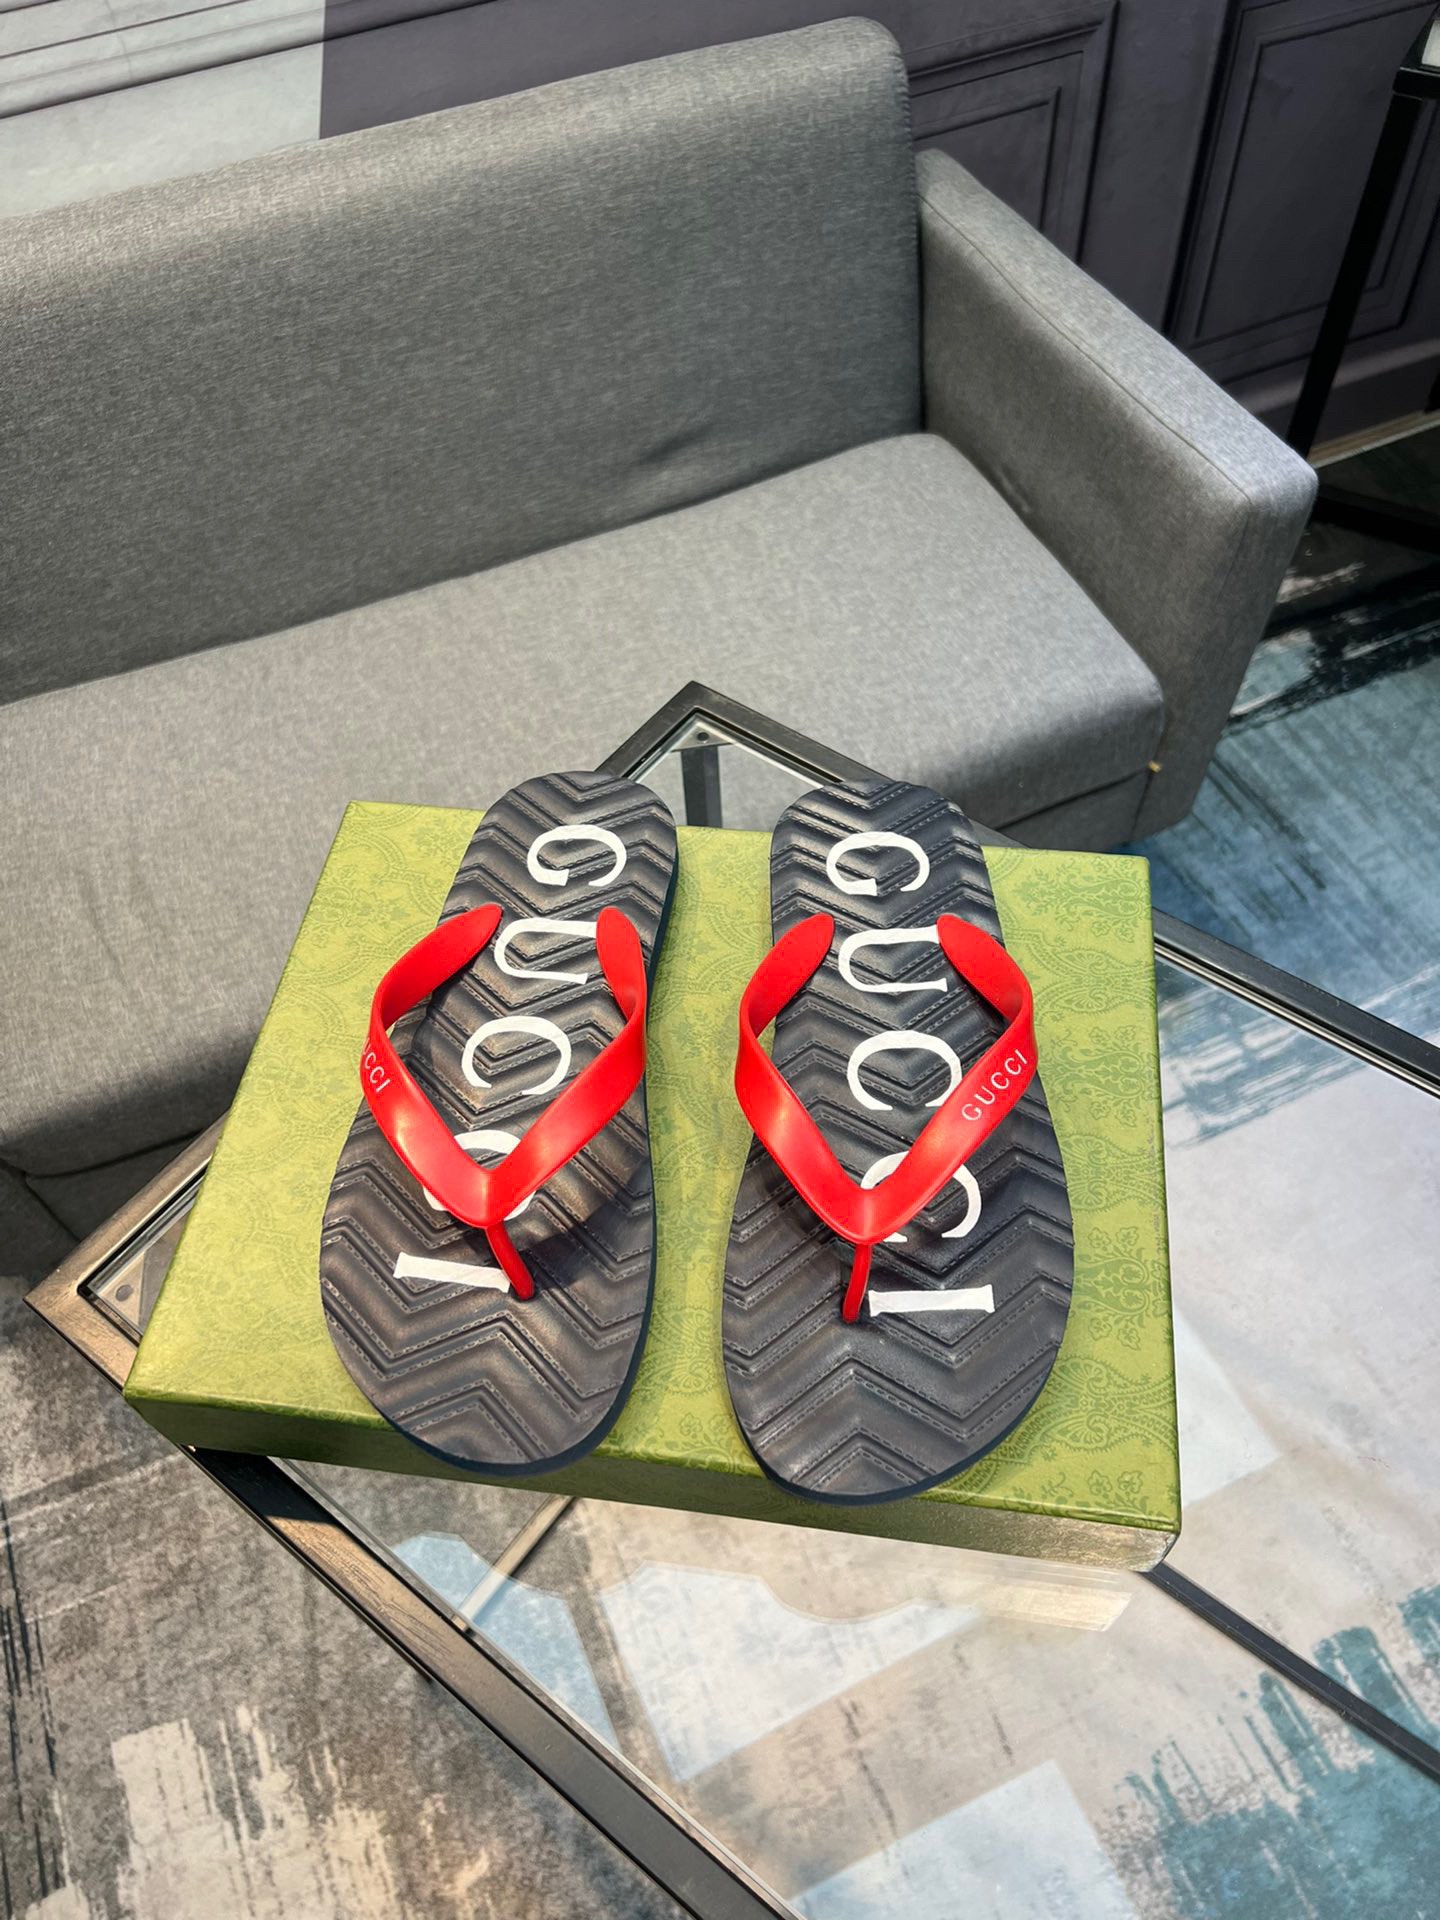 Gucci Shoes Flip Flops Slippers